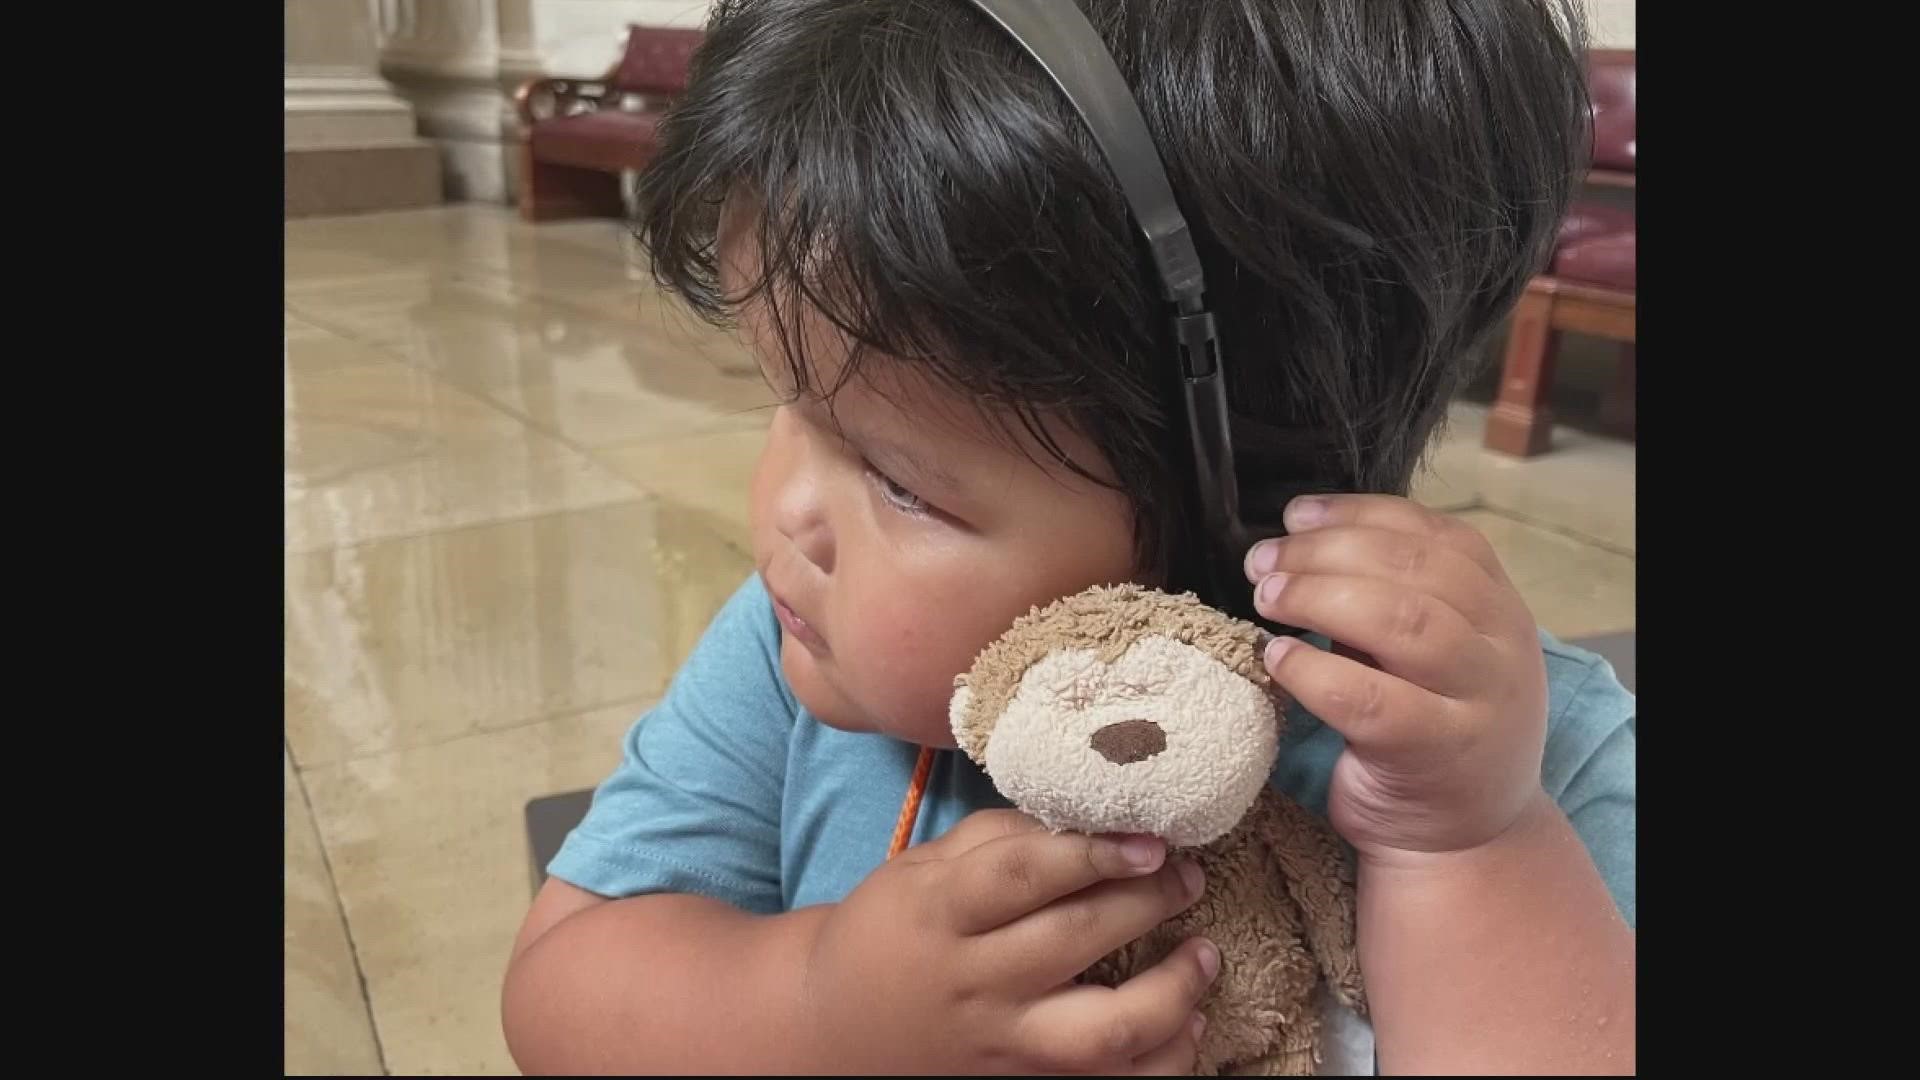 The family says the stuffed monkey named Mocha belongs to their 3-year-old child, who is now heartbroken by the loss.